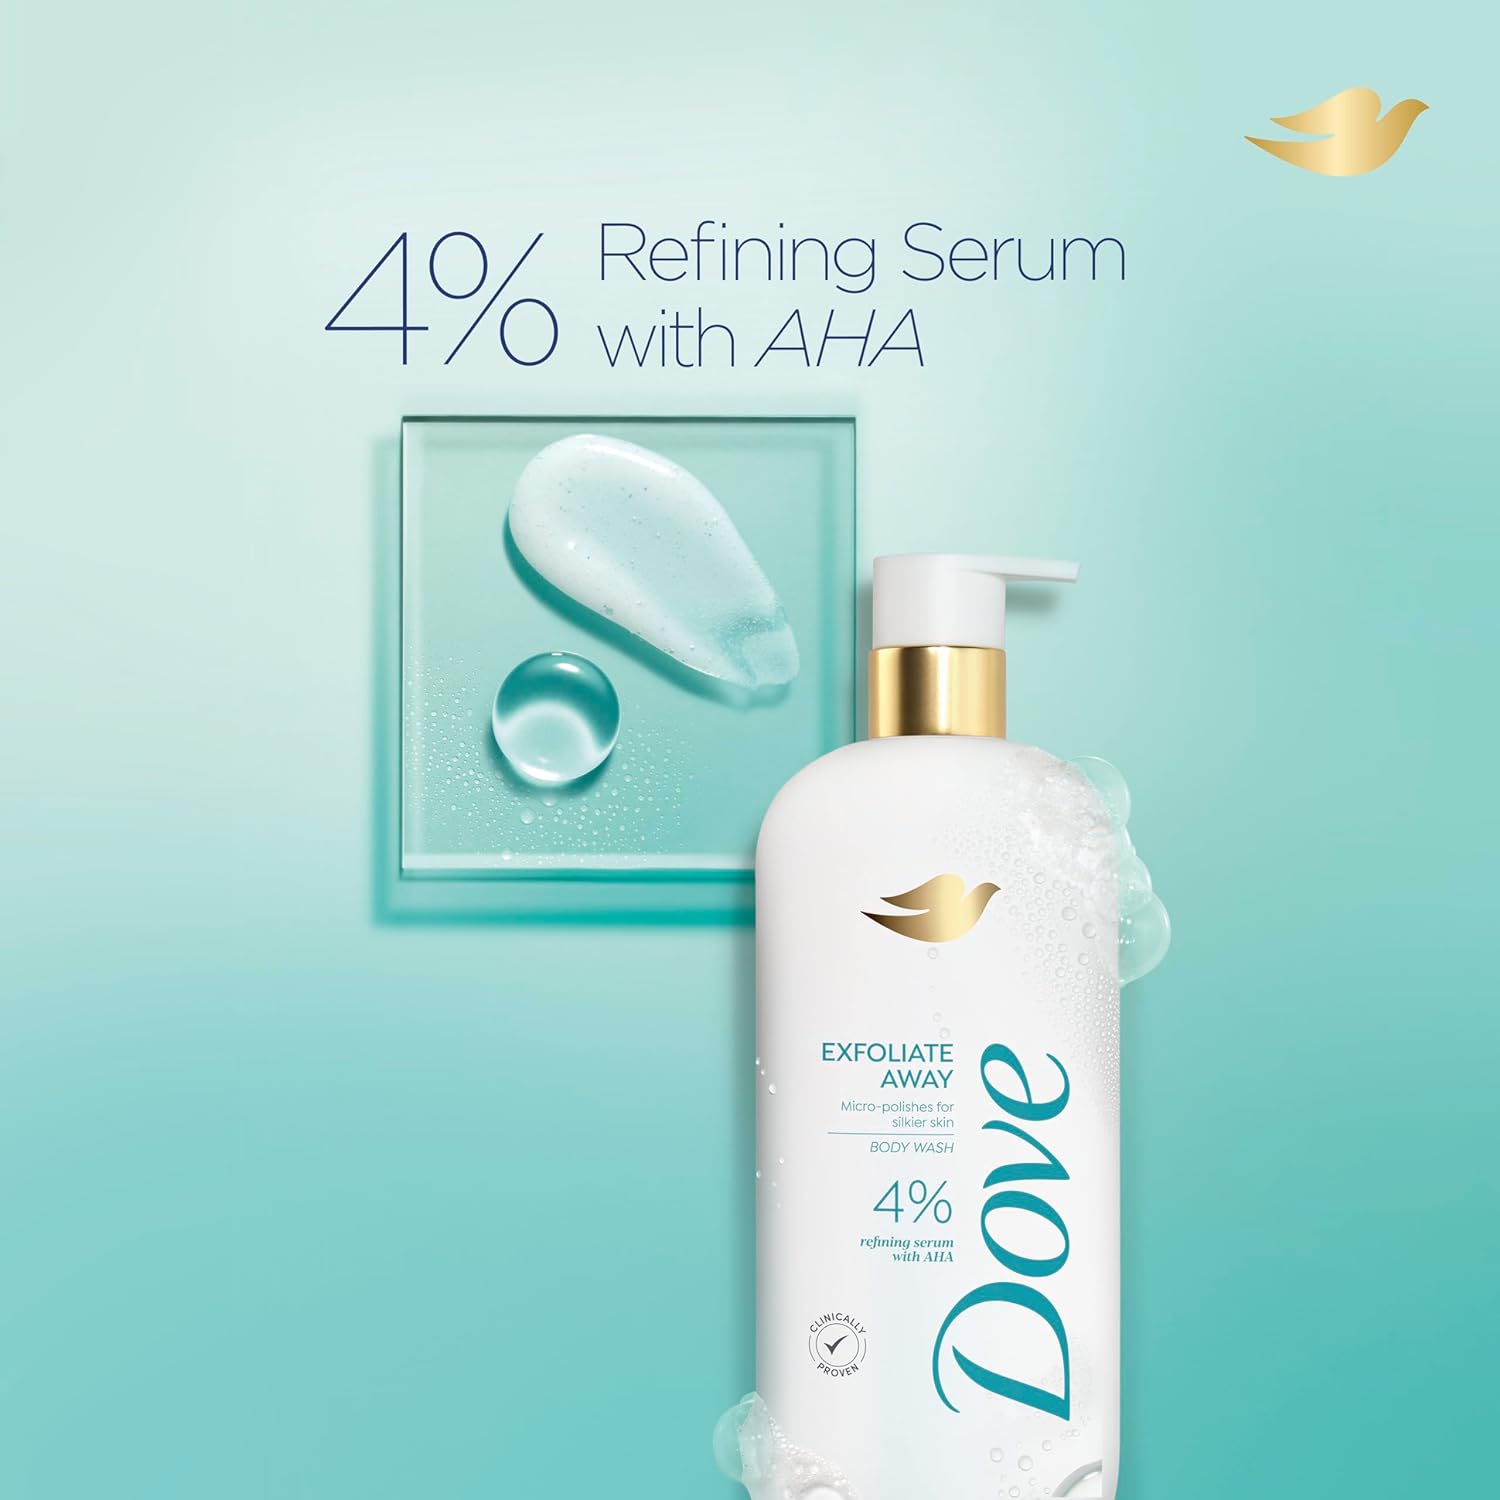 Dove Body Wash Exfoliate Away Micro-polishes for silkier skin 4% refining serum with AHA 18.5 oz : Beauty & Personal Care